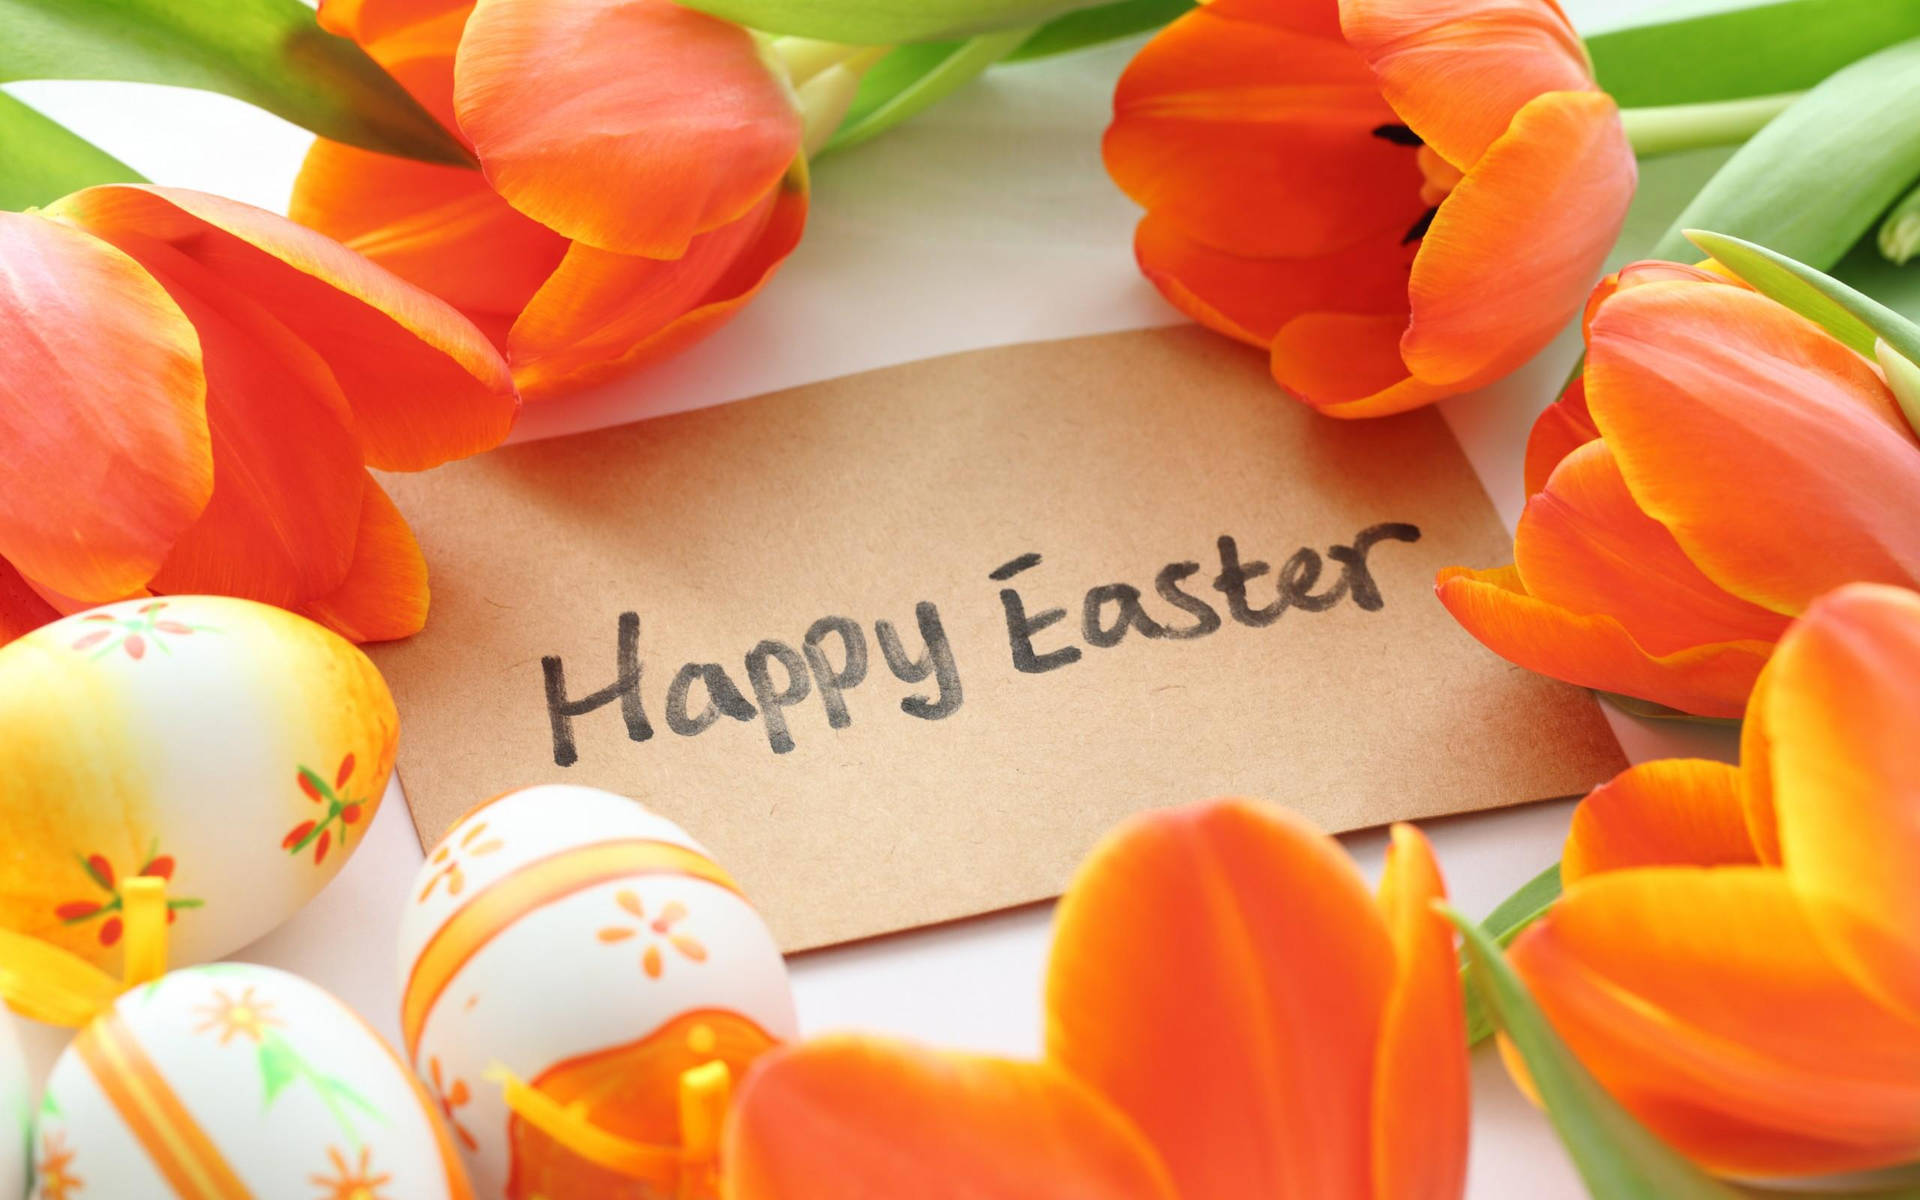 Happy Easter Greeting Card With Orange Tulips Wallpaper